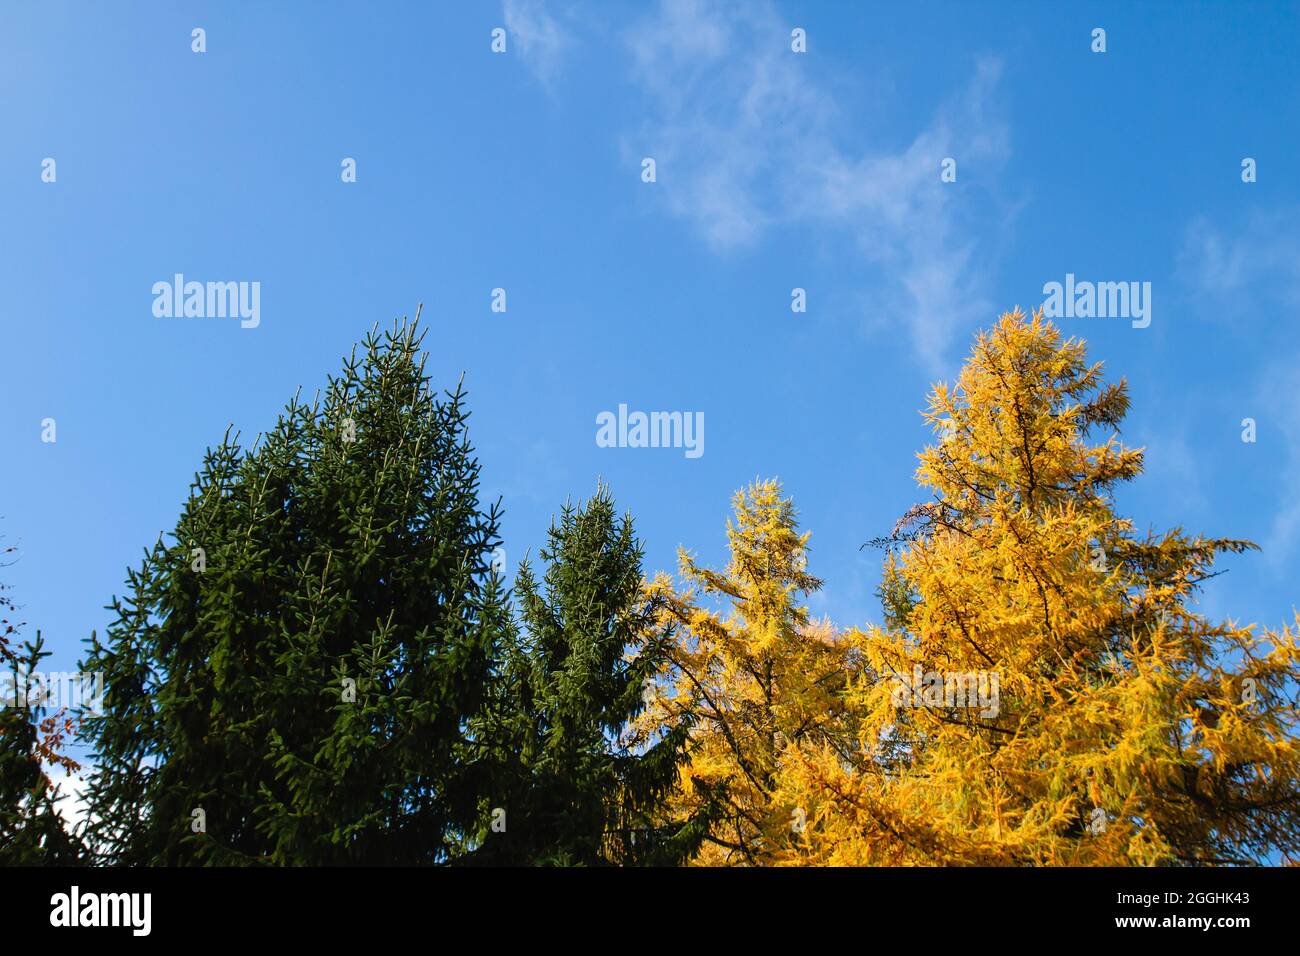 Evergreen picea and deciduous larix or larch tree with green and yellow needle-like foliage in early autumn, mixed conifers trees, blue sky background Stock Photo